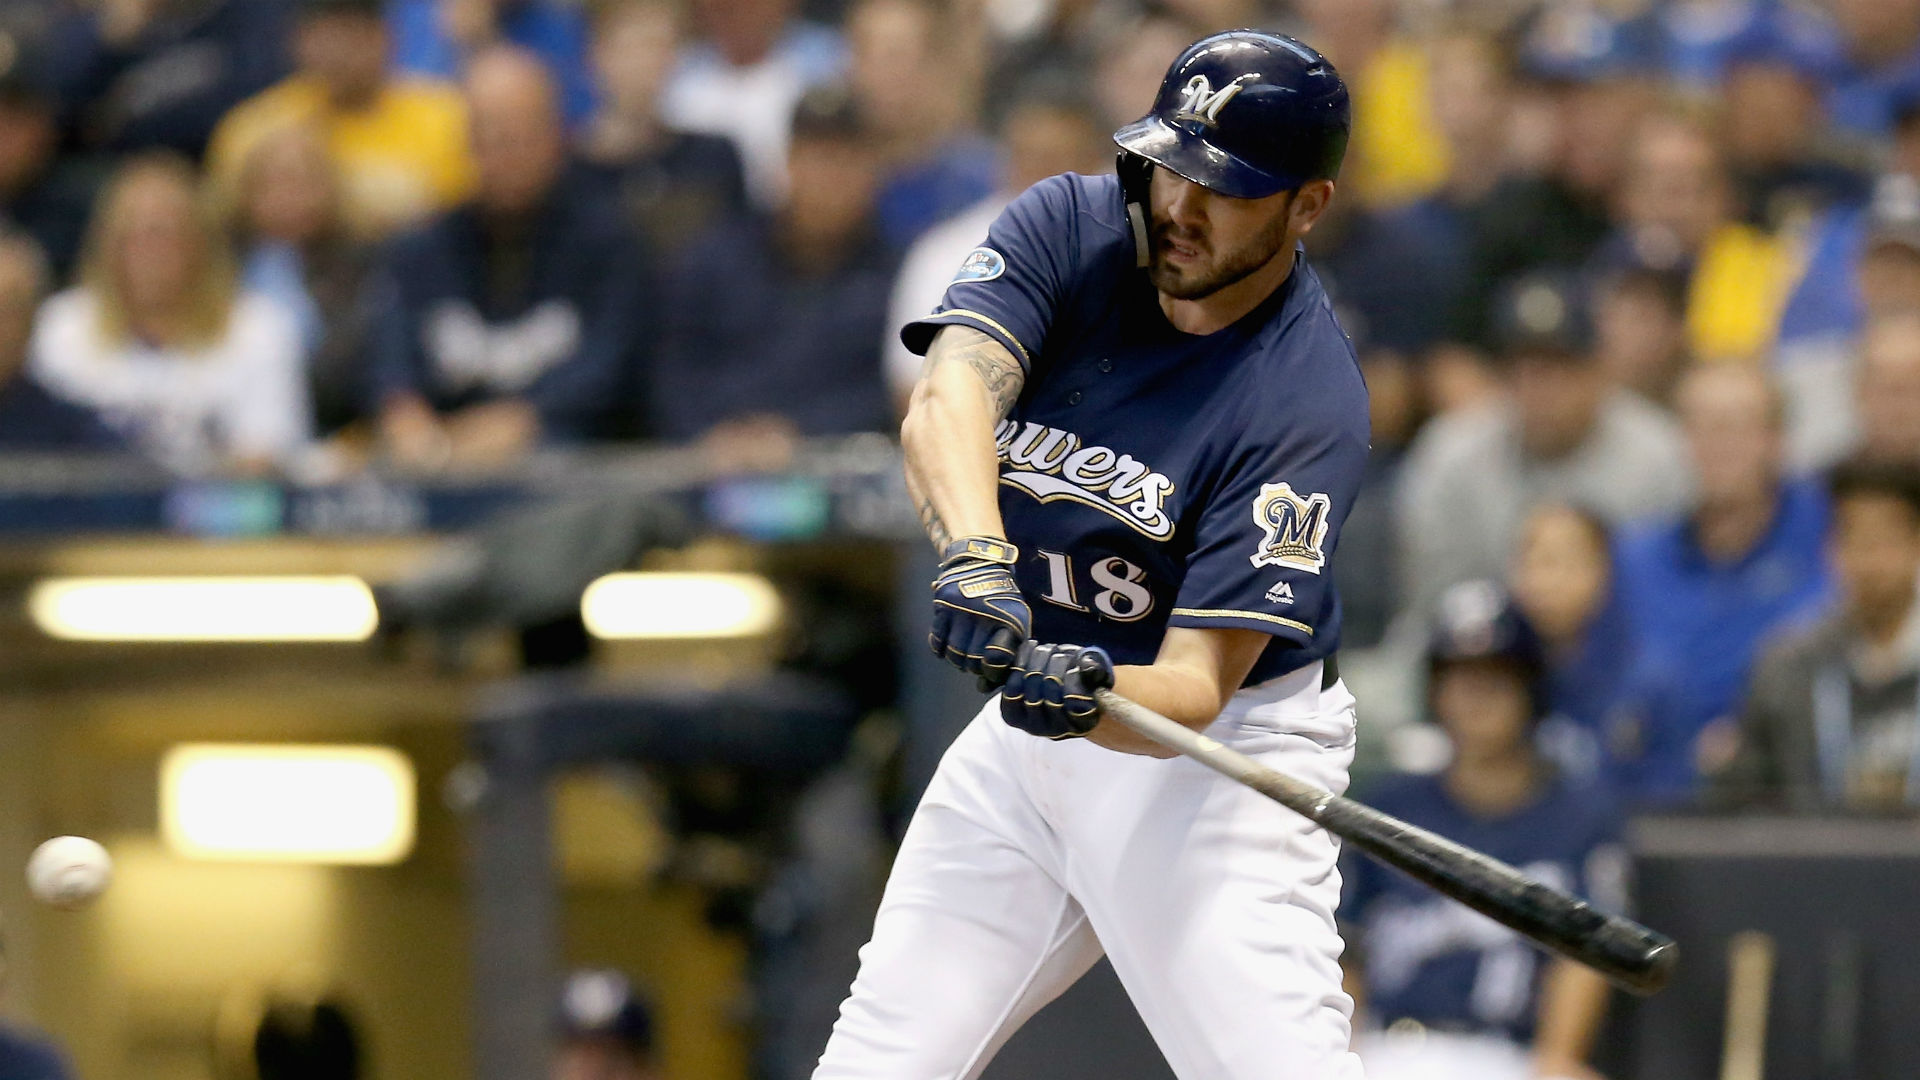 The Phillies and Padres both have had reported interest in Moustakas as a backup plan.